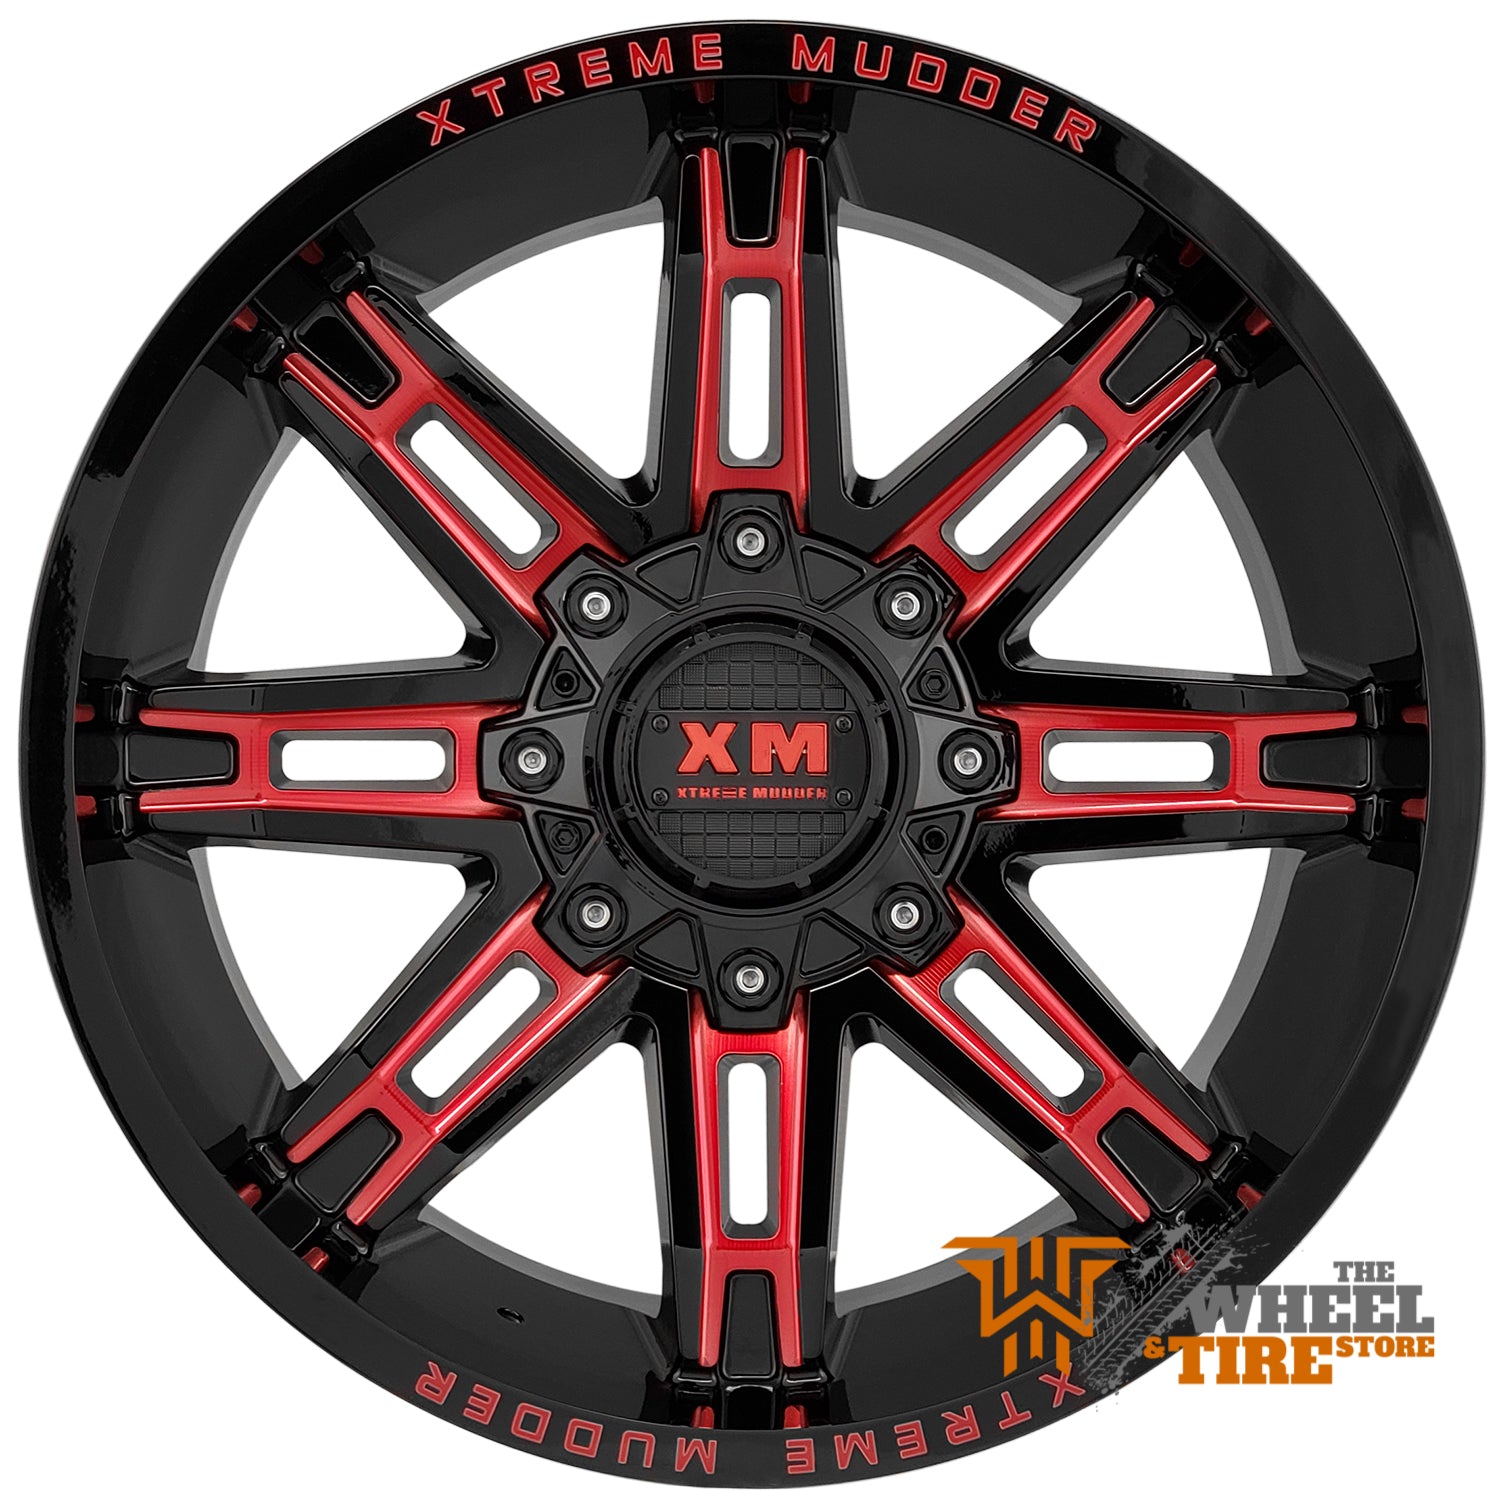 XTREME MUDDER XM-335 Wheel in Gloss Black Red Milled (Set of 4)